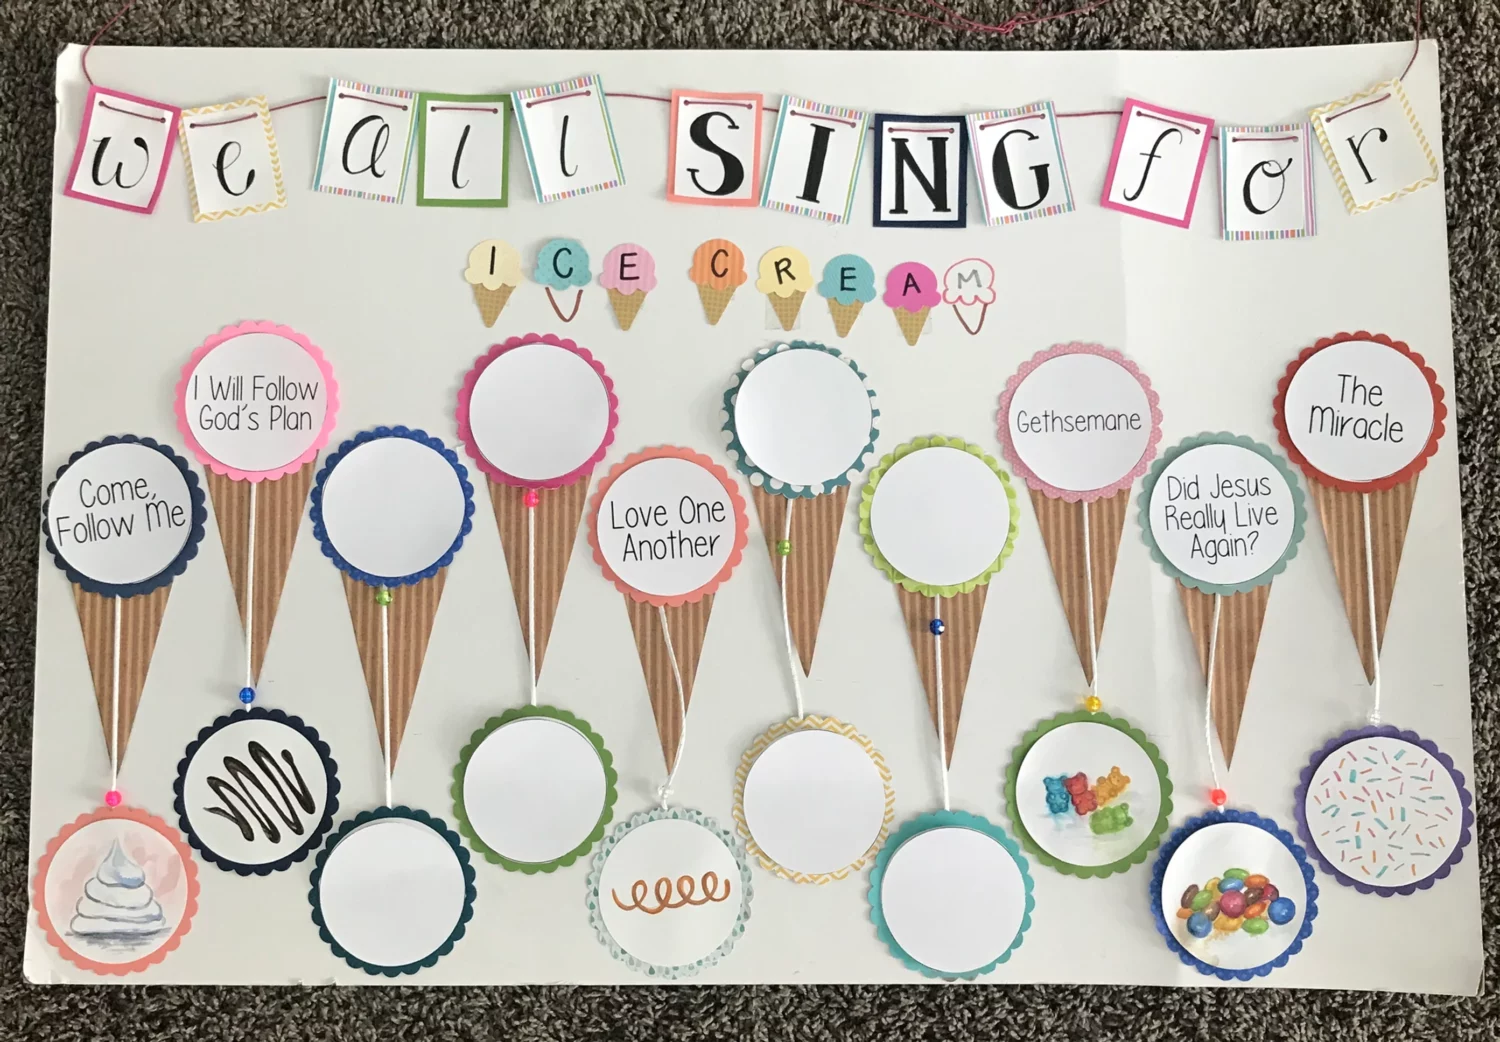 We all Sing for Ice Cream -- 20 Primary Program Review Ideas